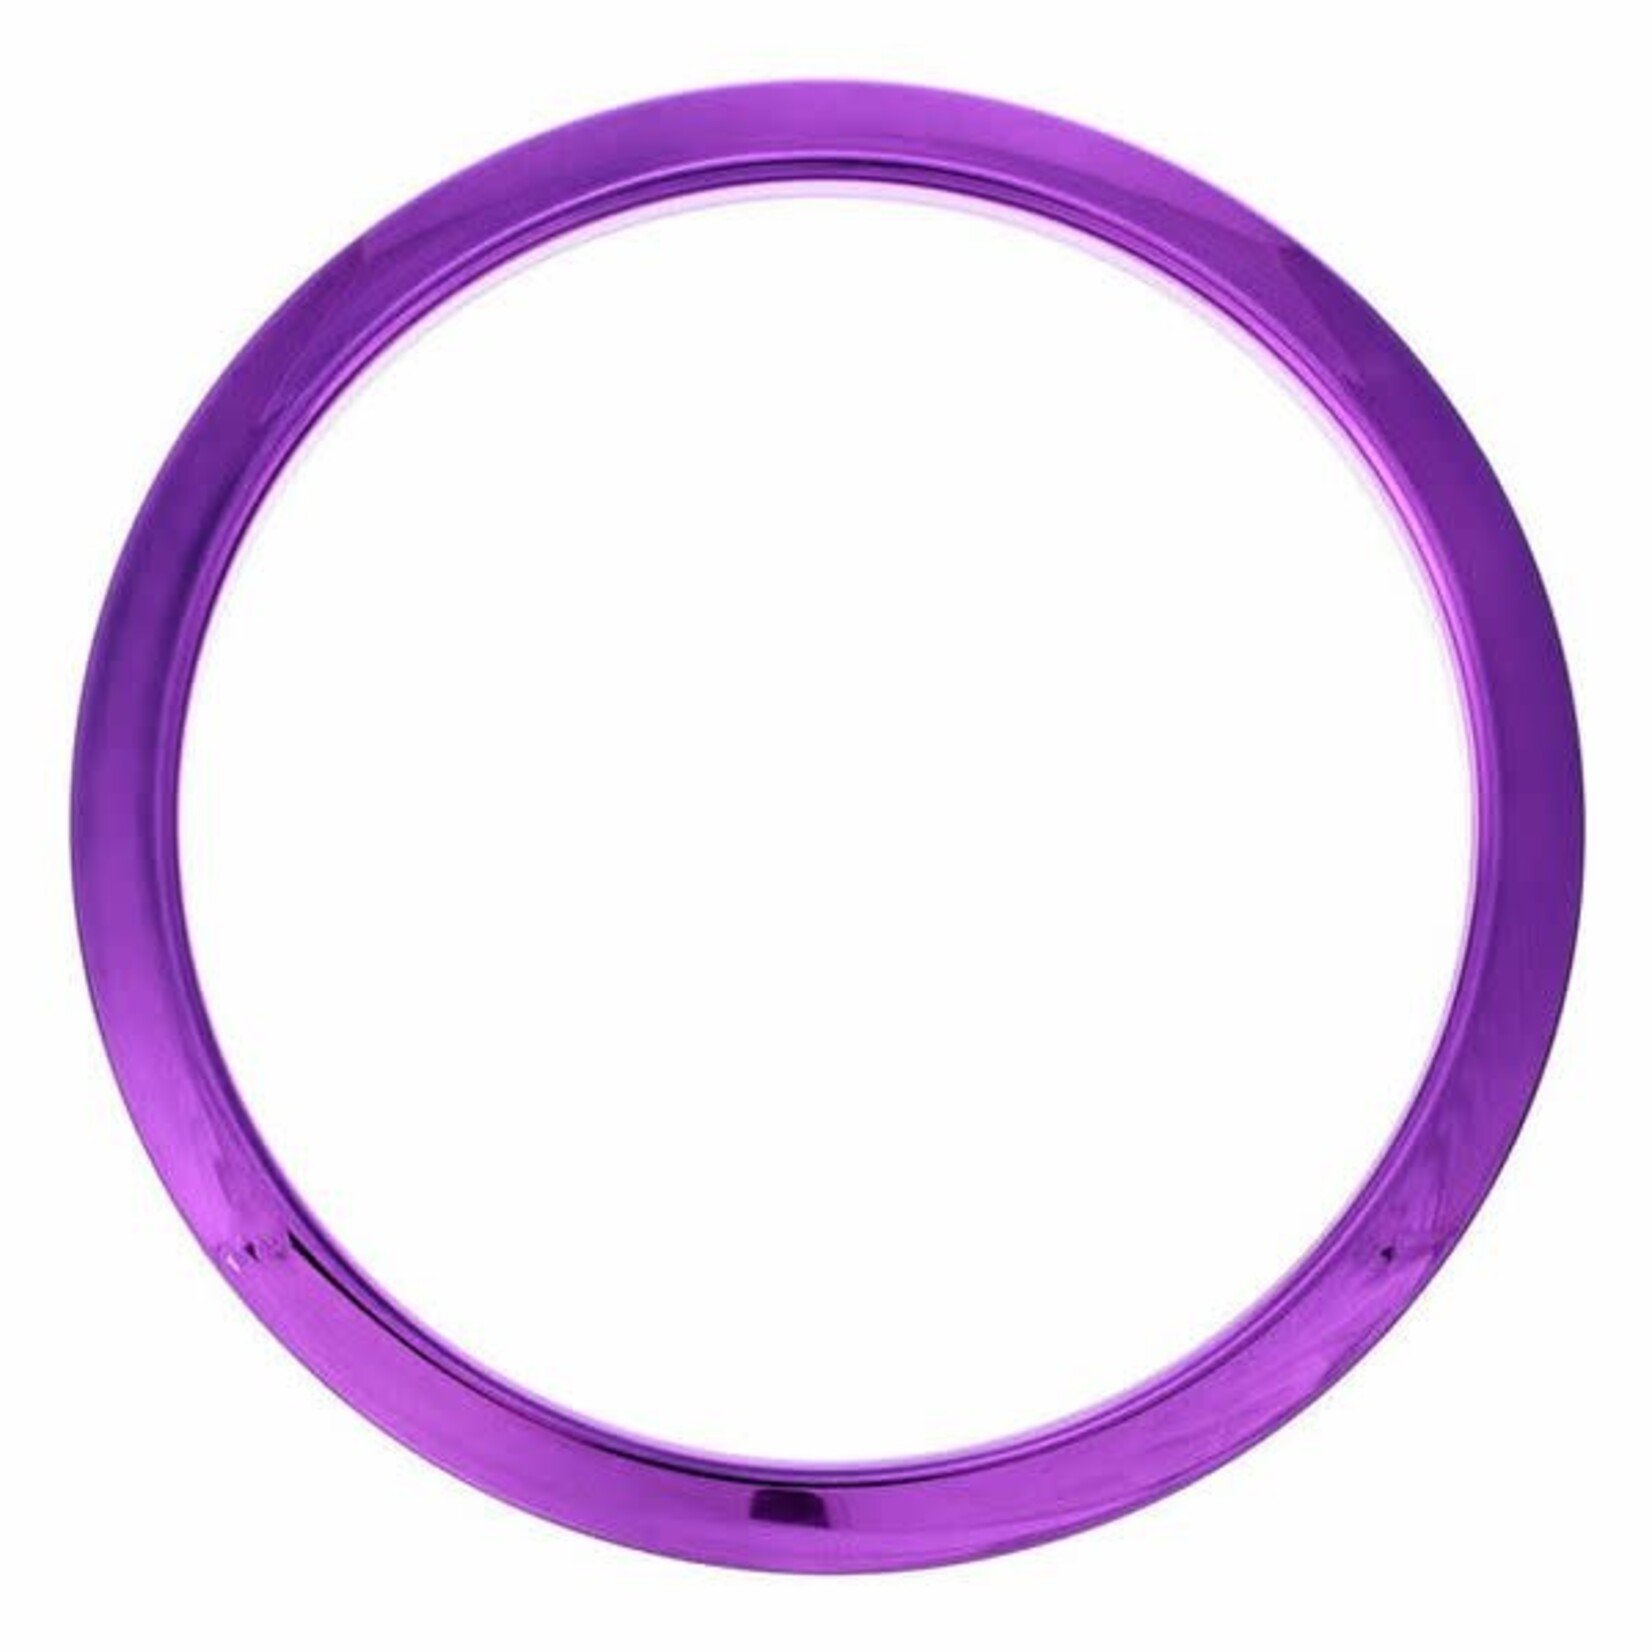 Bass Drum O's Bass Drum O's 6" Purple (Hole Reinforcement System) HCP6